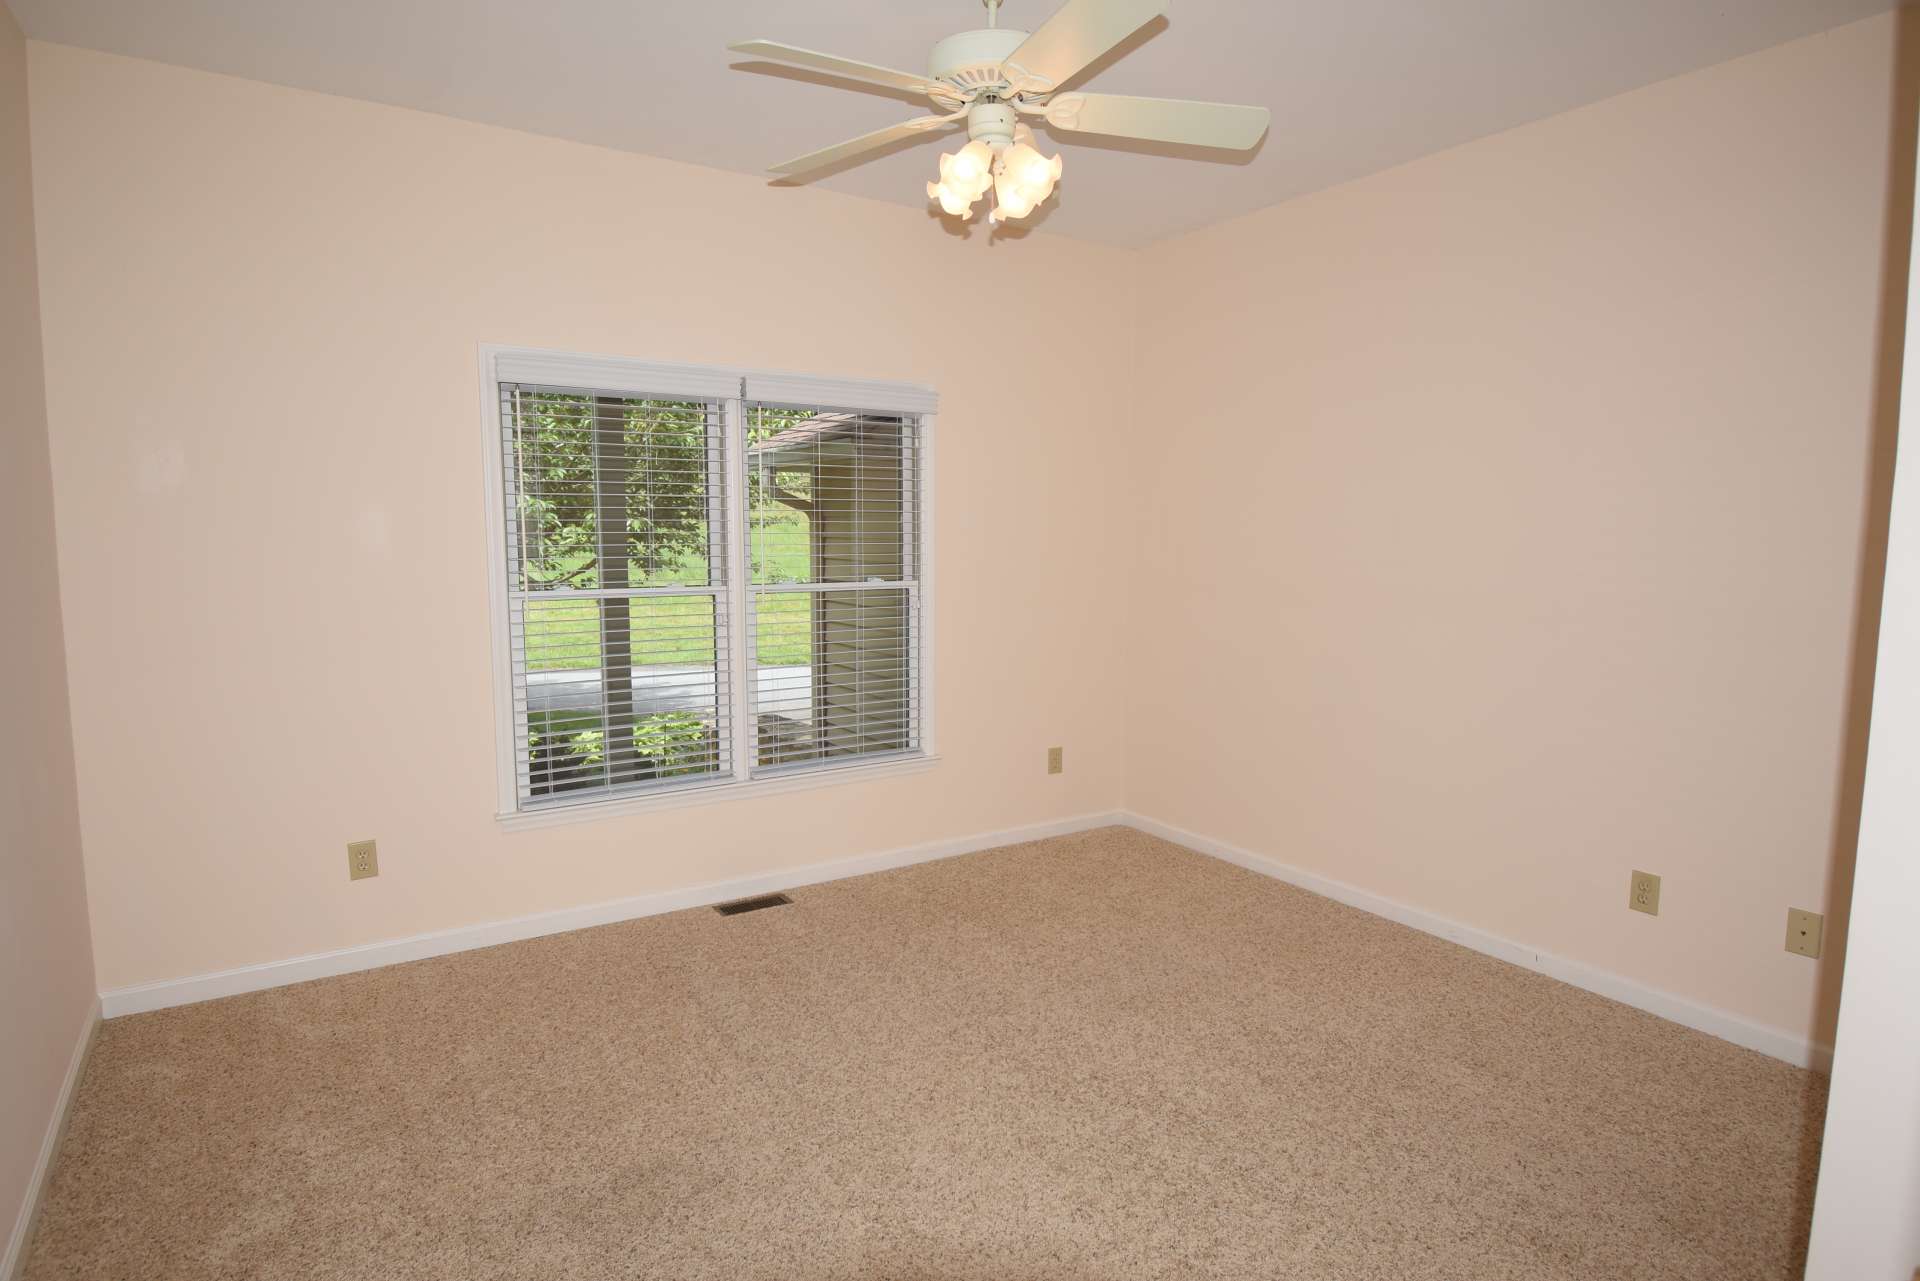 The second main level bedroom is  generously sized and offers a home office option. A dedicated laundry room and the 2-car attached garage complete the main level.